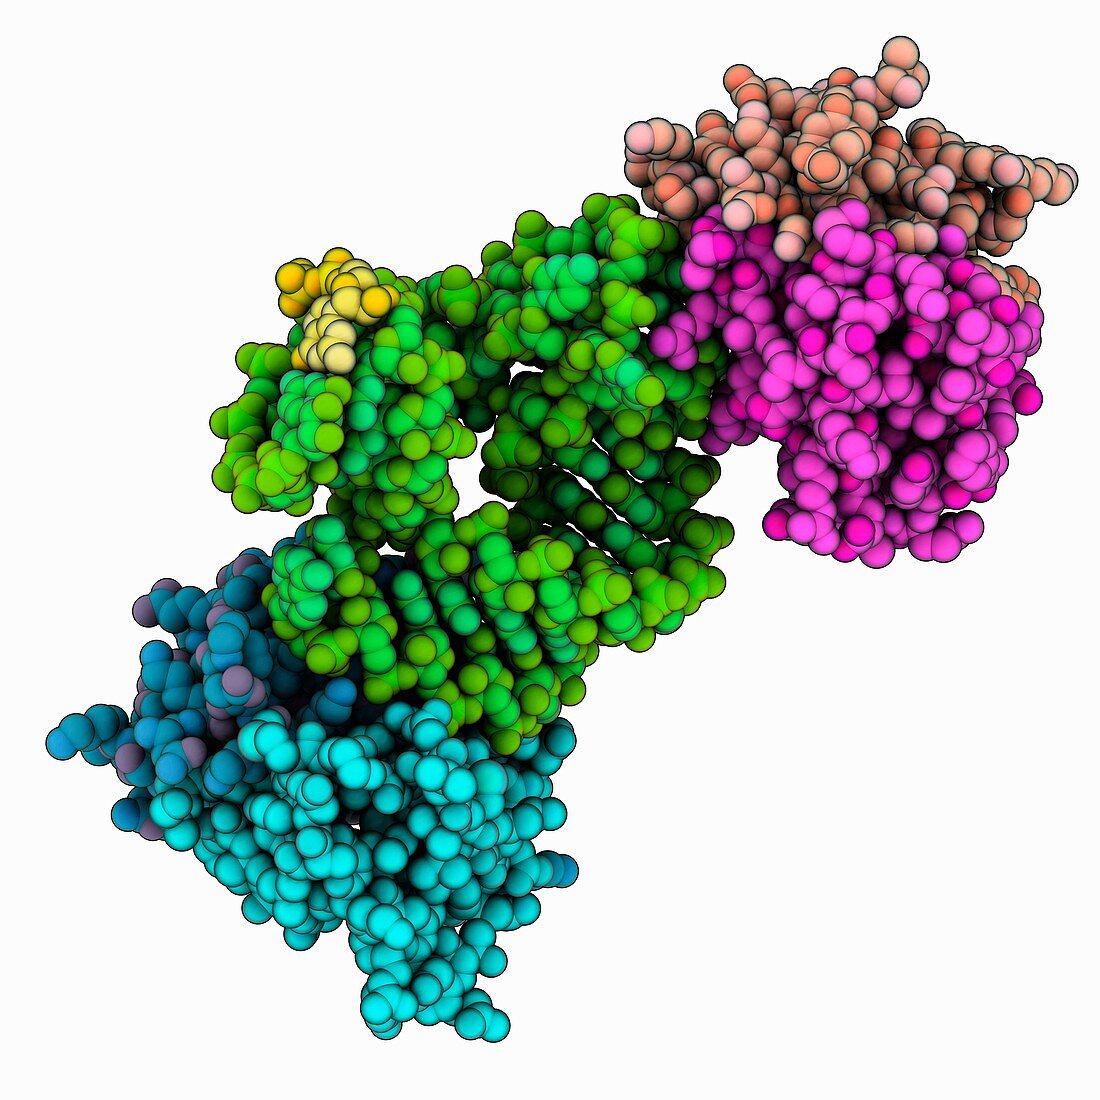 Signal recognition particle protein